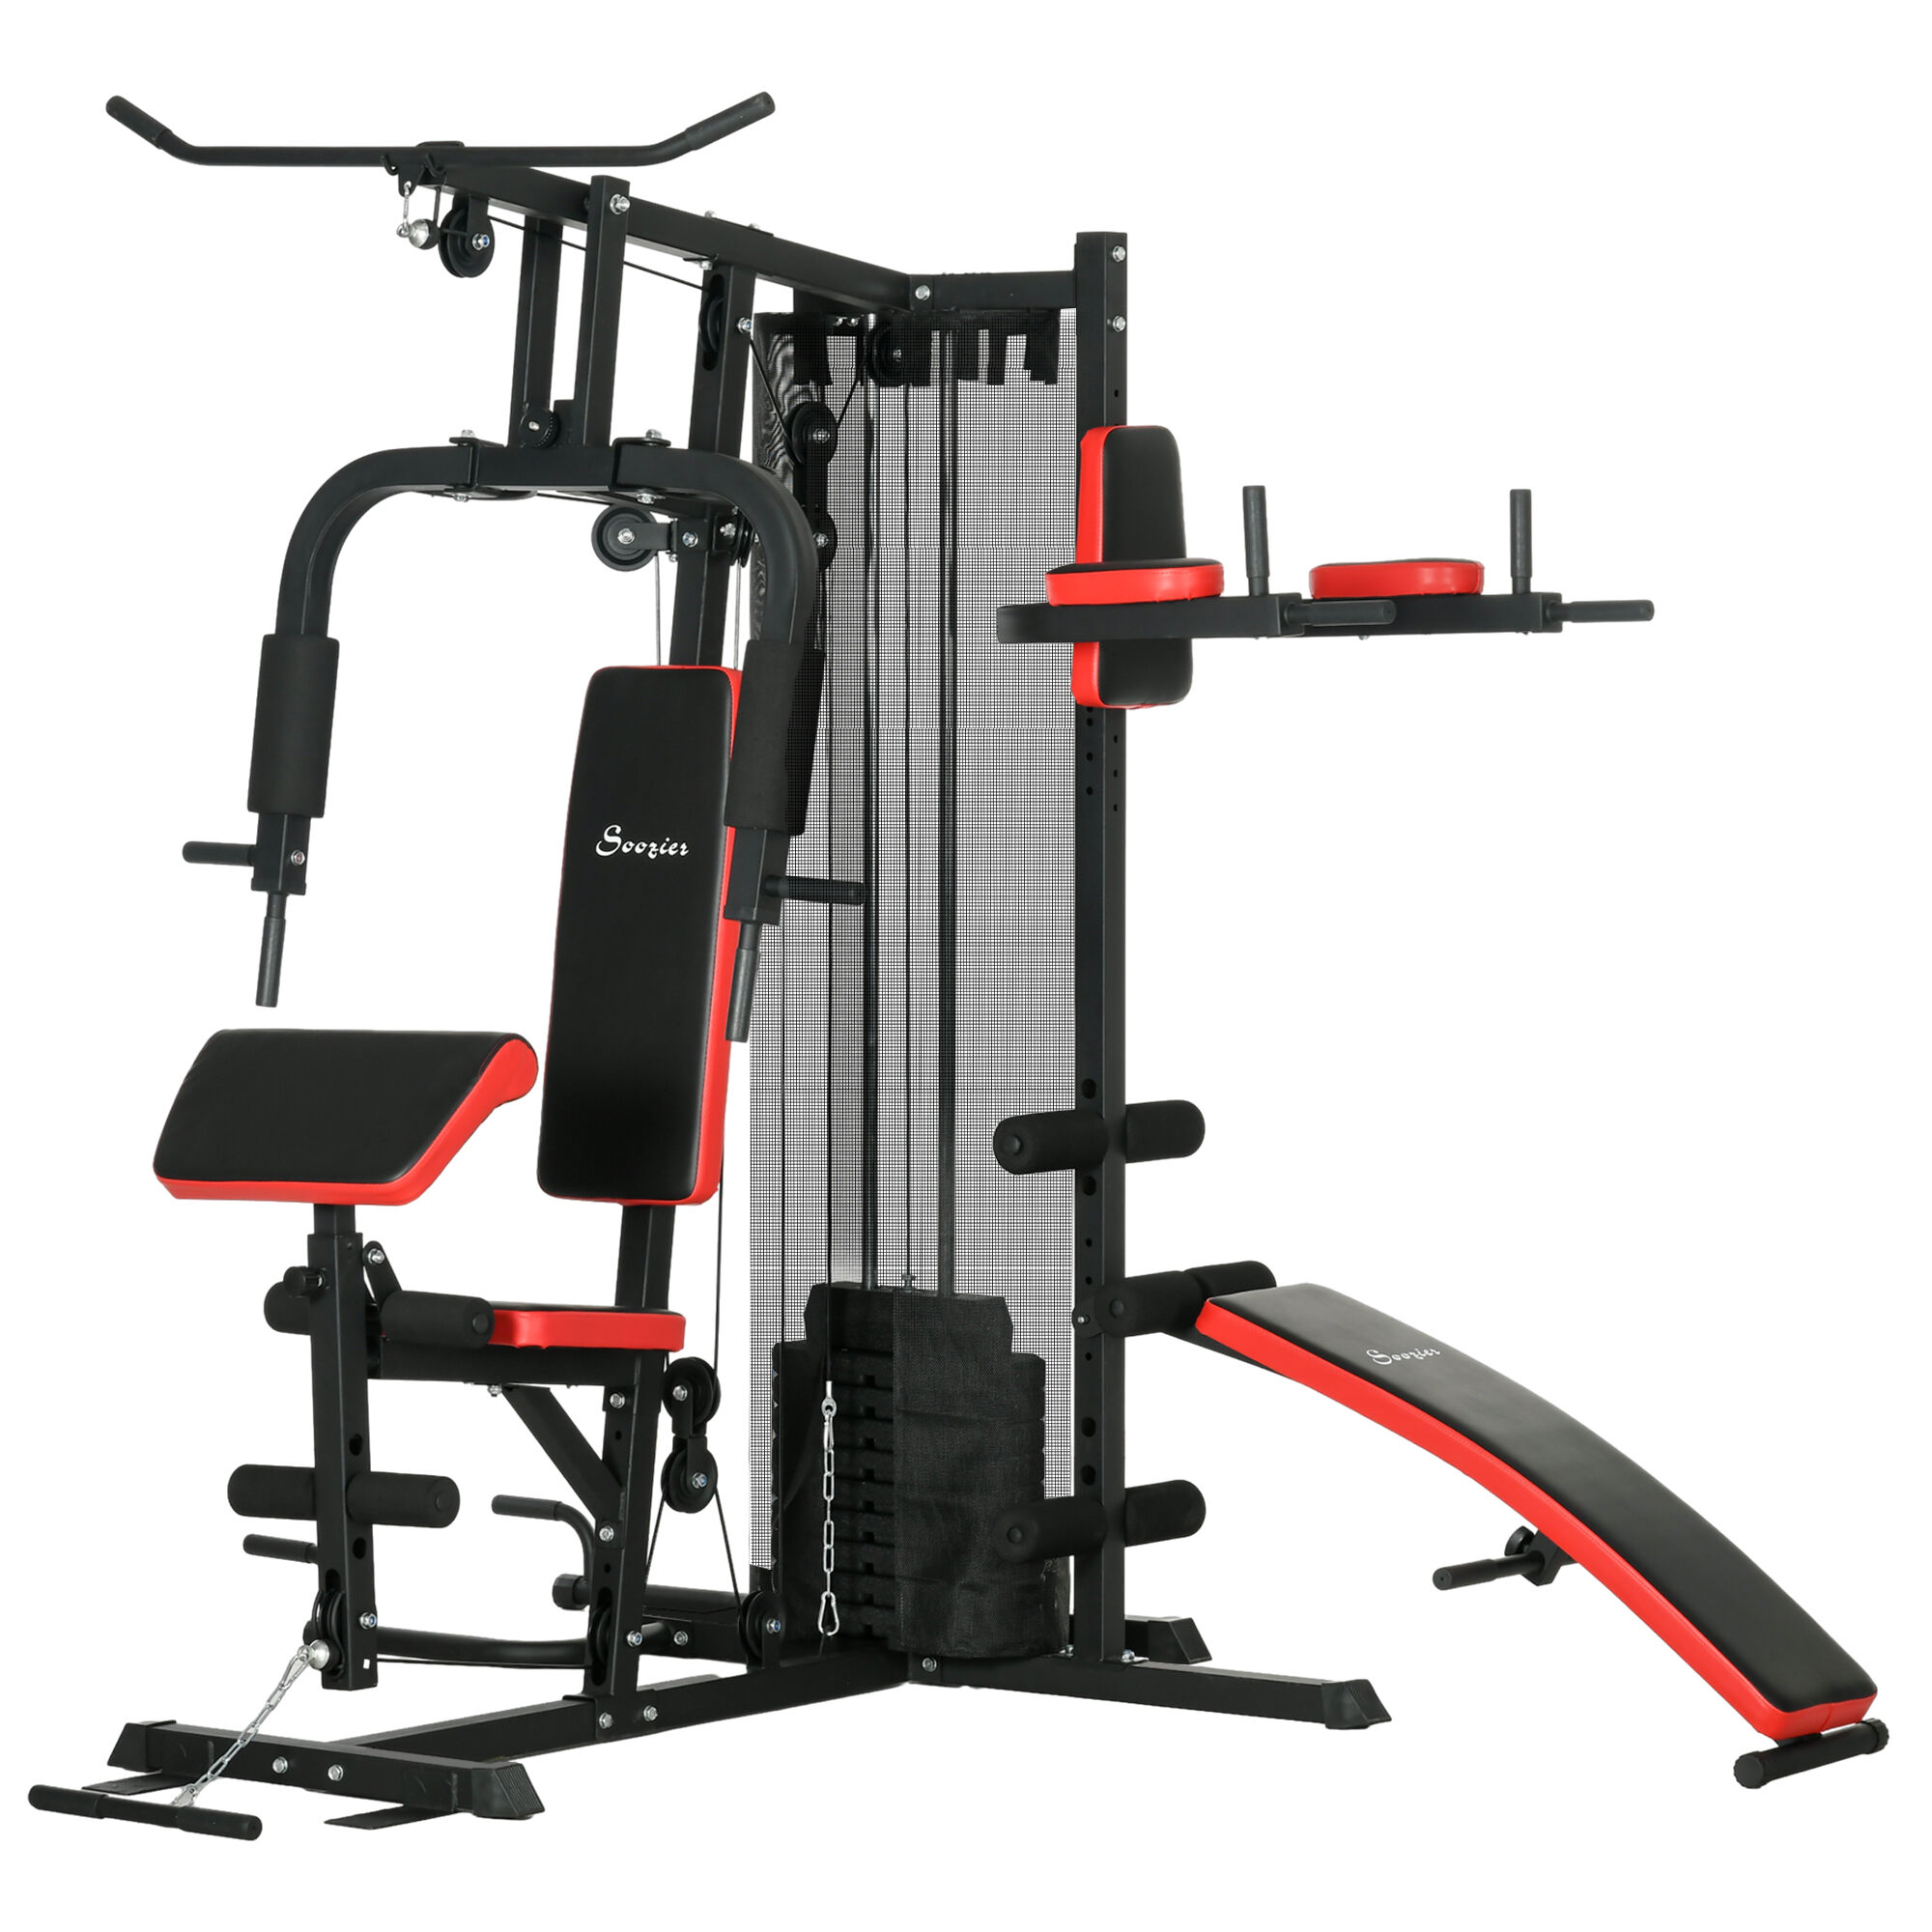 Soozier Multi Home Gym Equipment, Workout Station with Sit up Bench, Push up Stand, Dip Station, 143lbs Weights